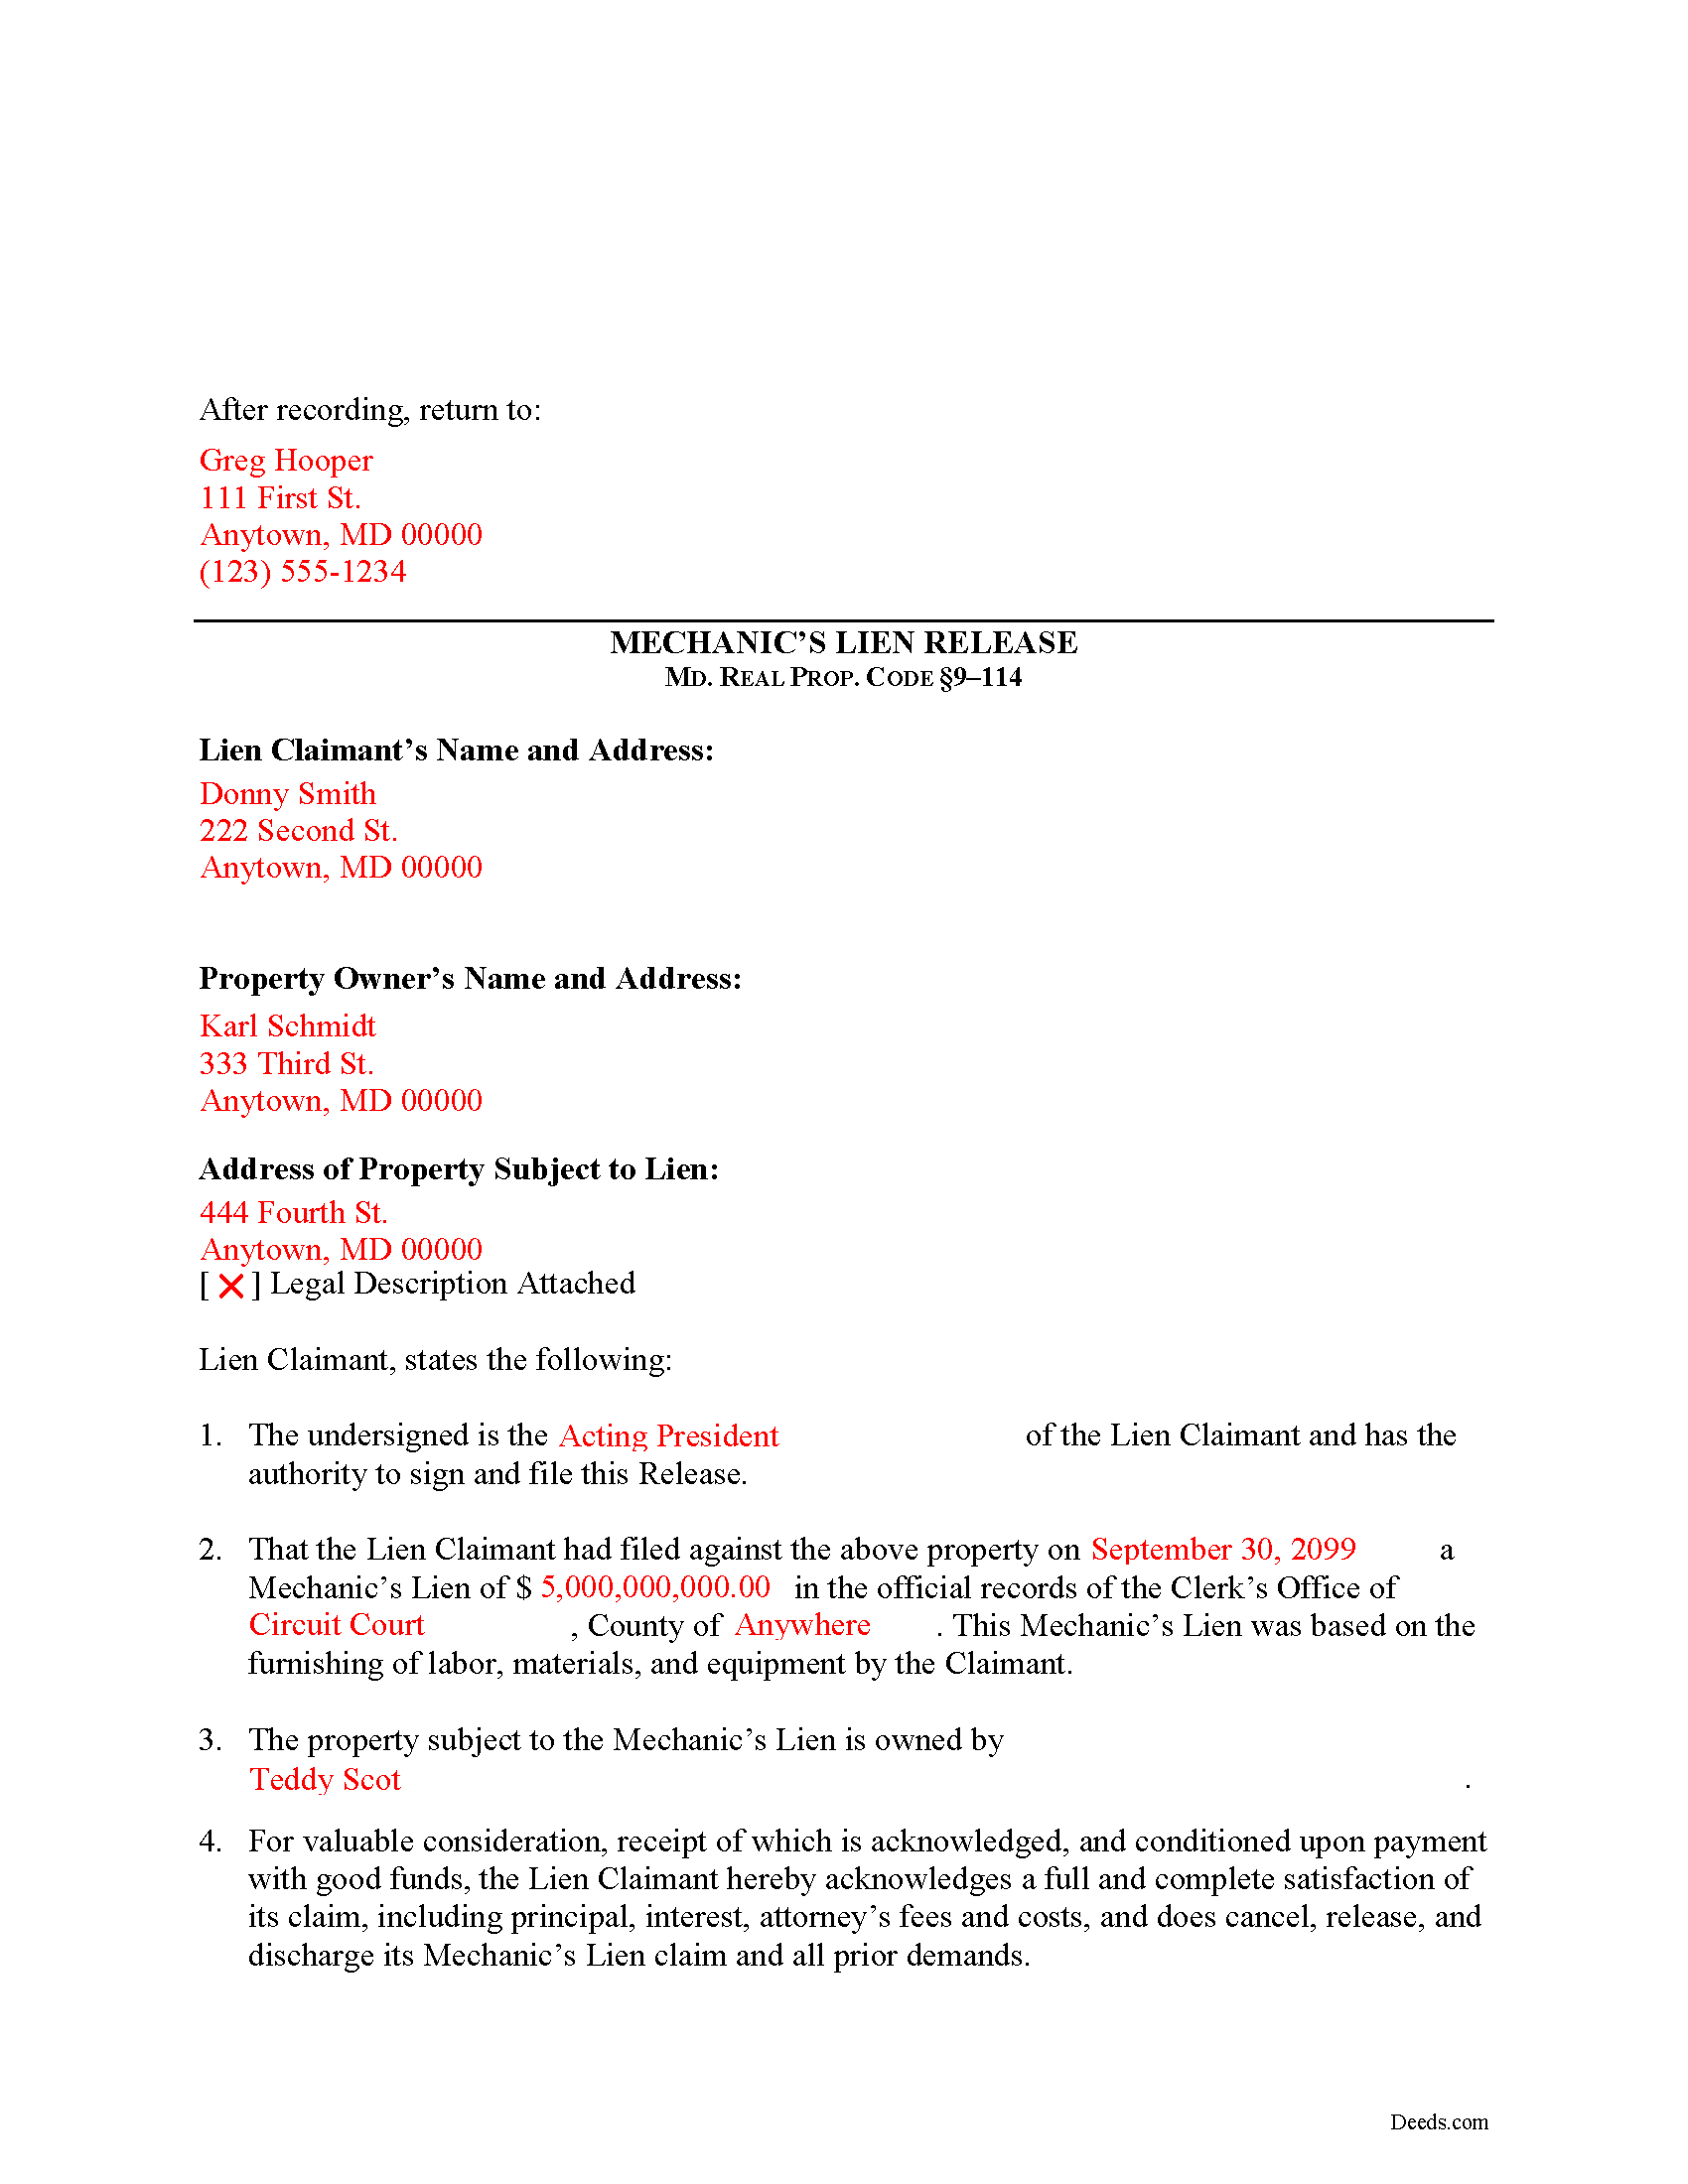 Completed Example of the Mechanics Lien Release Document